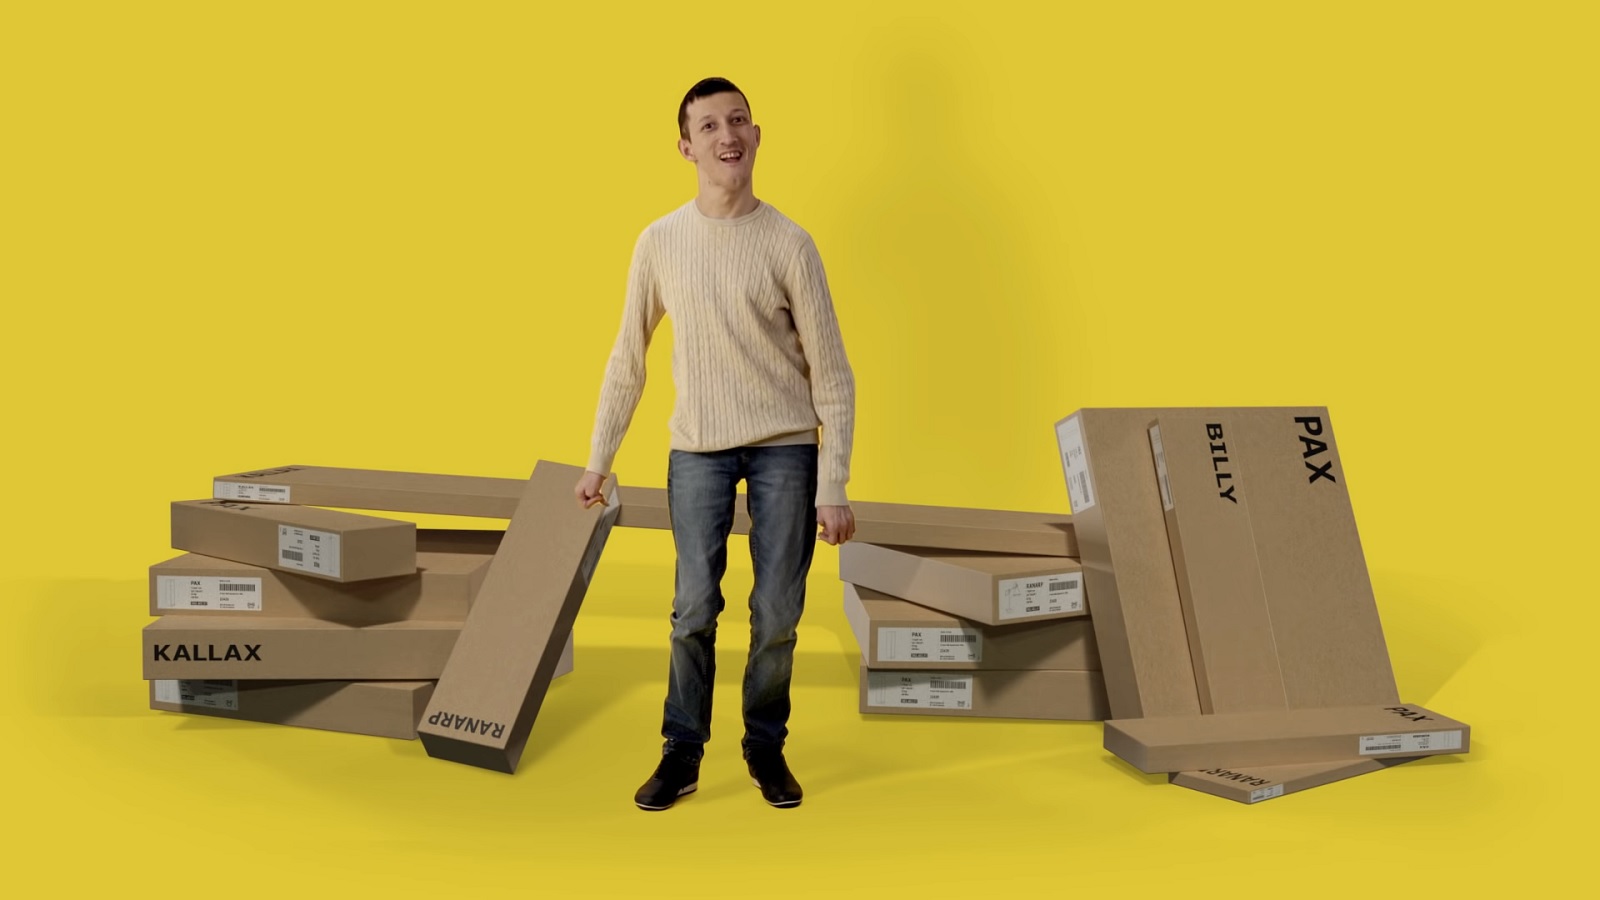 Ikea Develops Special Products for People with Special Needs